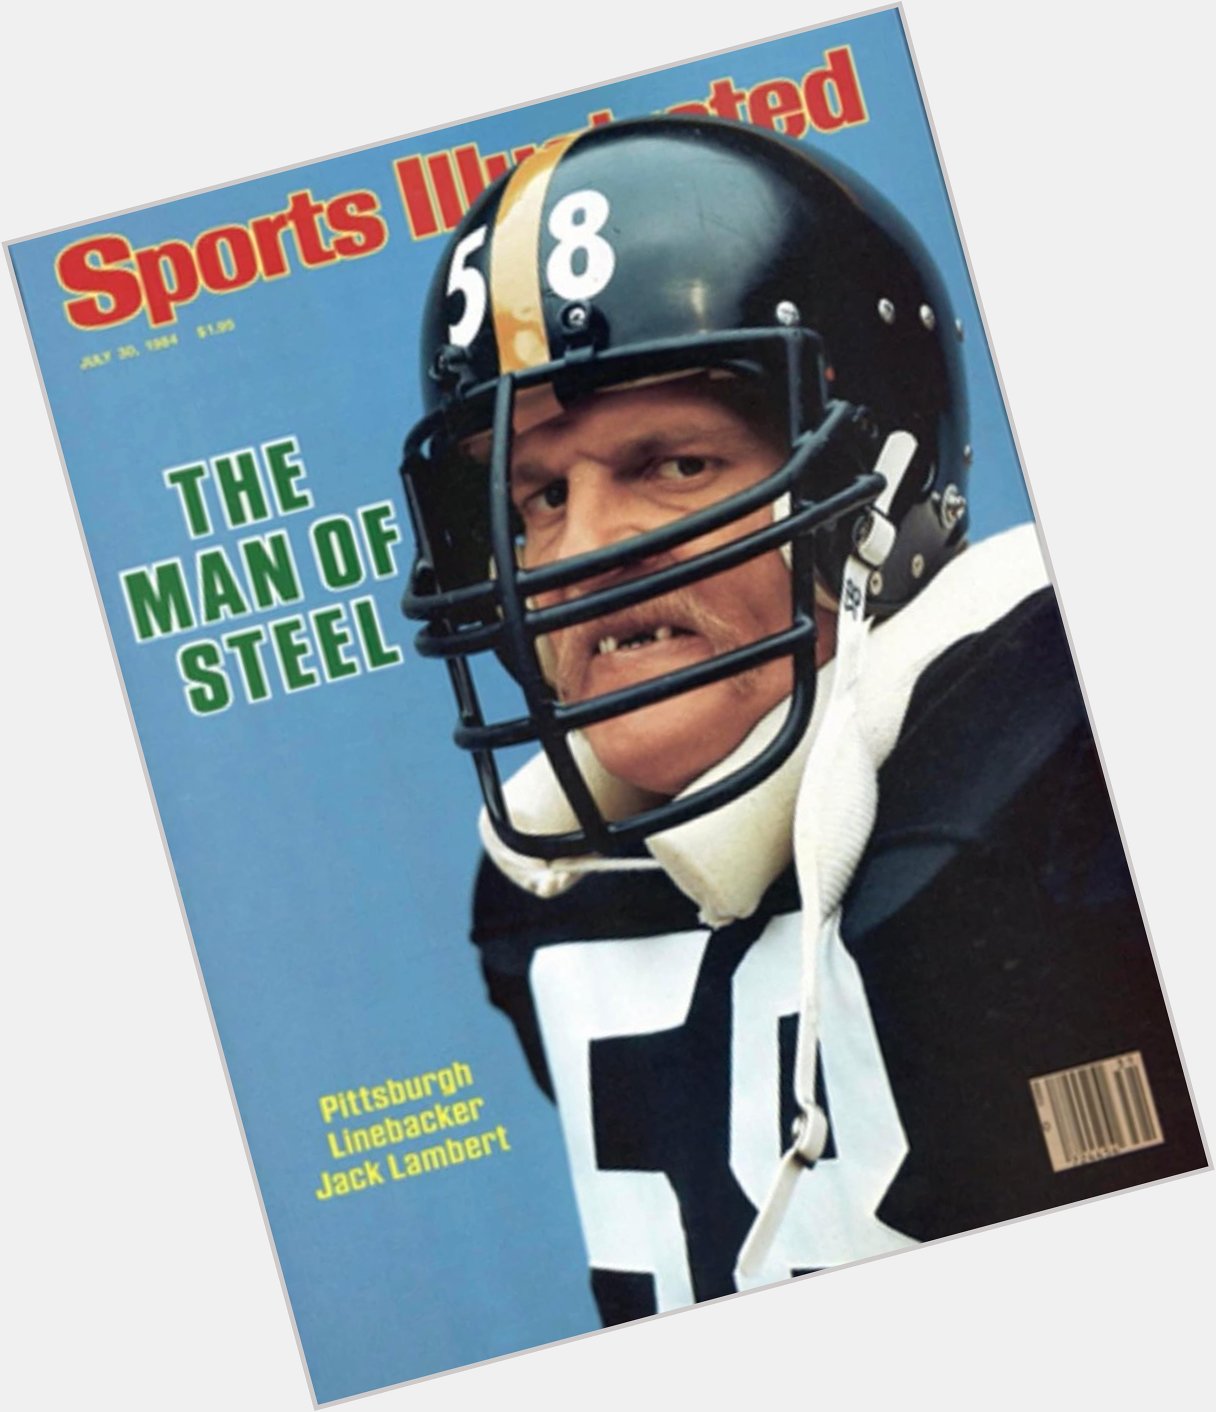 Happy 71st Birthday to the one and only Jack Lambert 